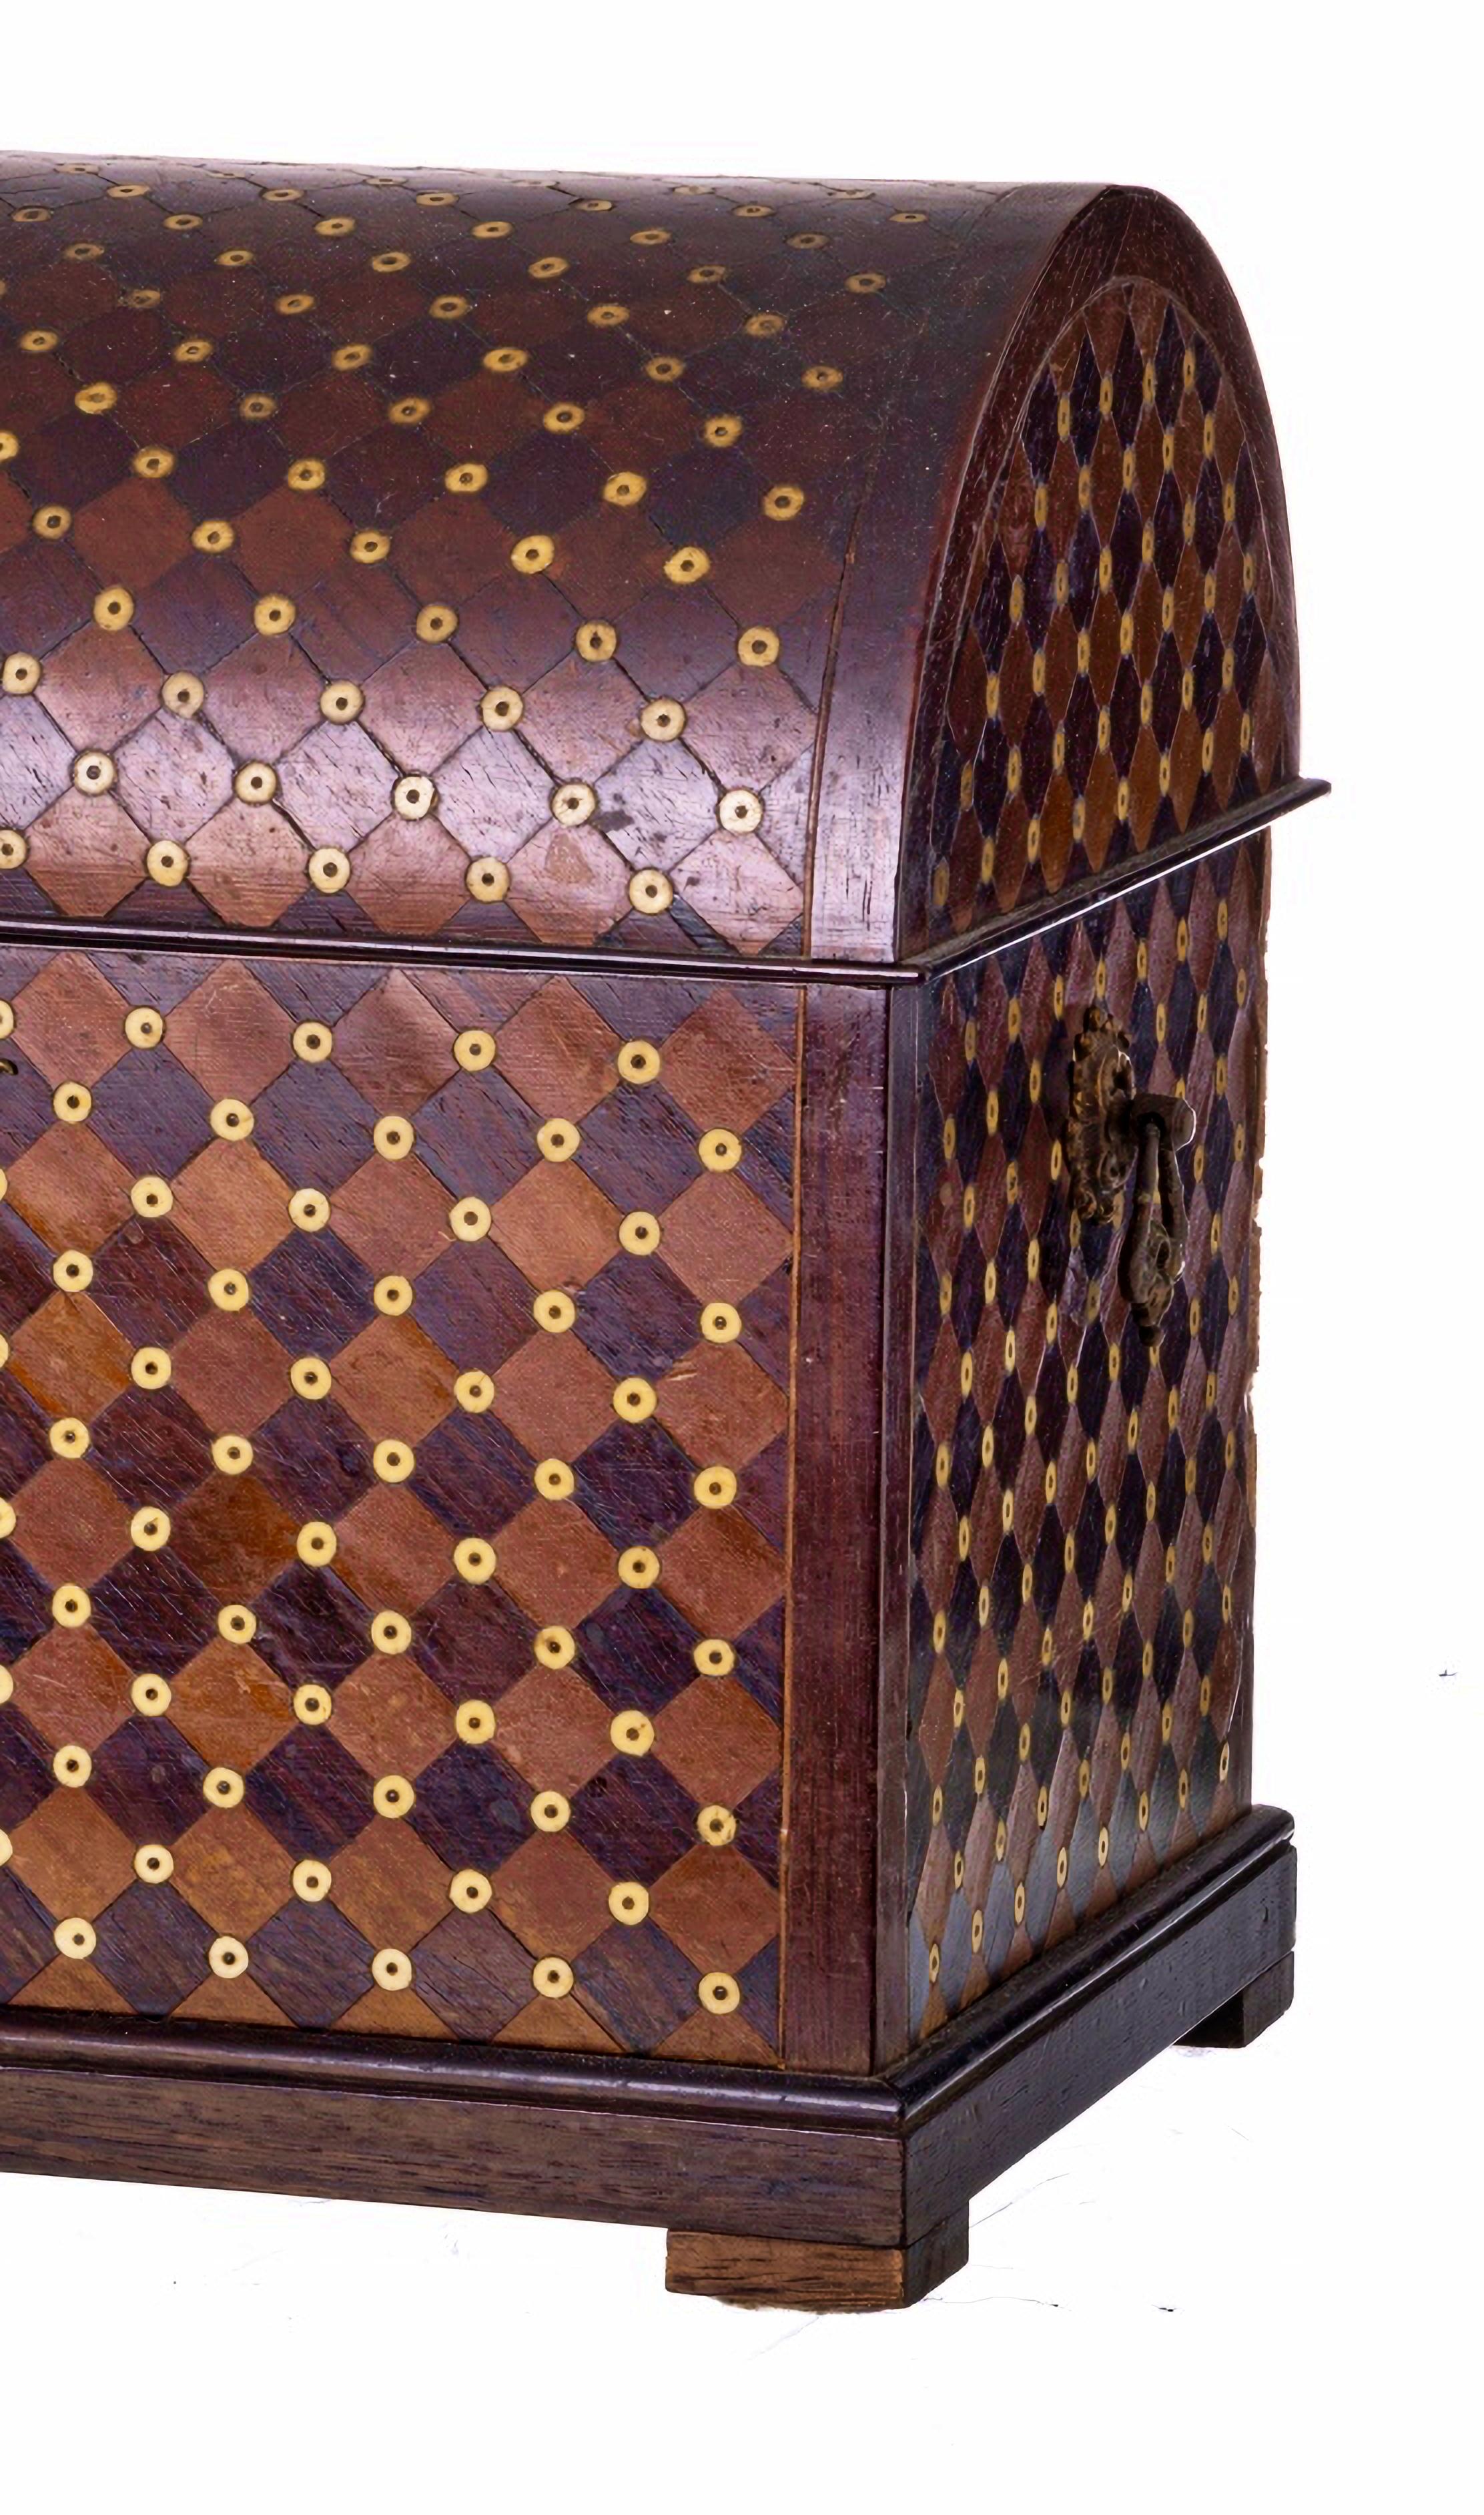 CHEST

Italian, 19th Century,
in ebony and teak wood with ivory inlays.
Metal hardware and handles.
Small defects.
Dim.: 28 x 35 x 23 cm.
good condition